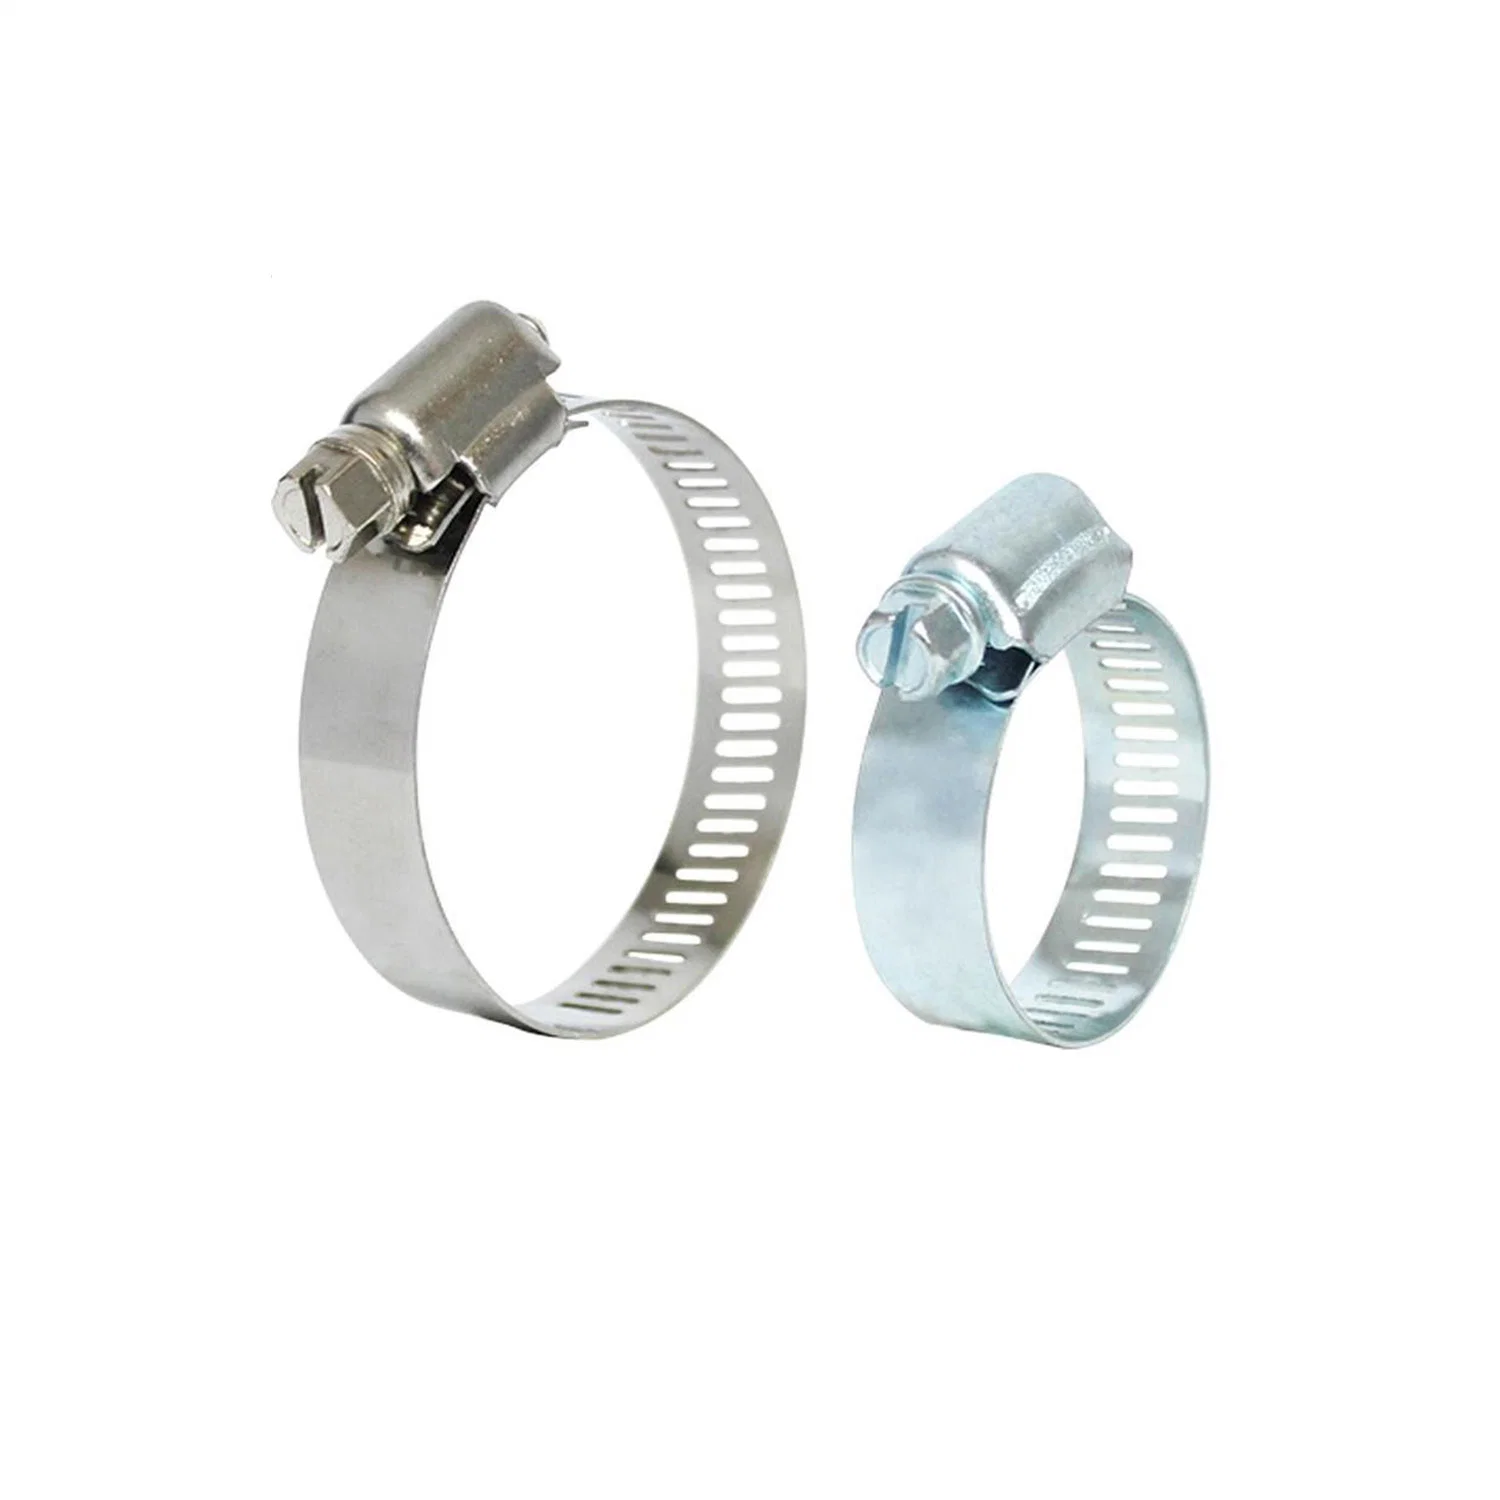 Stainless Steel Perforated Band Worm Gear Hose Clamp